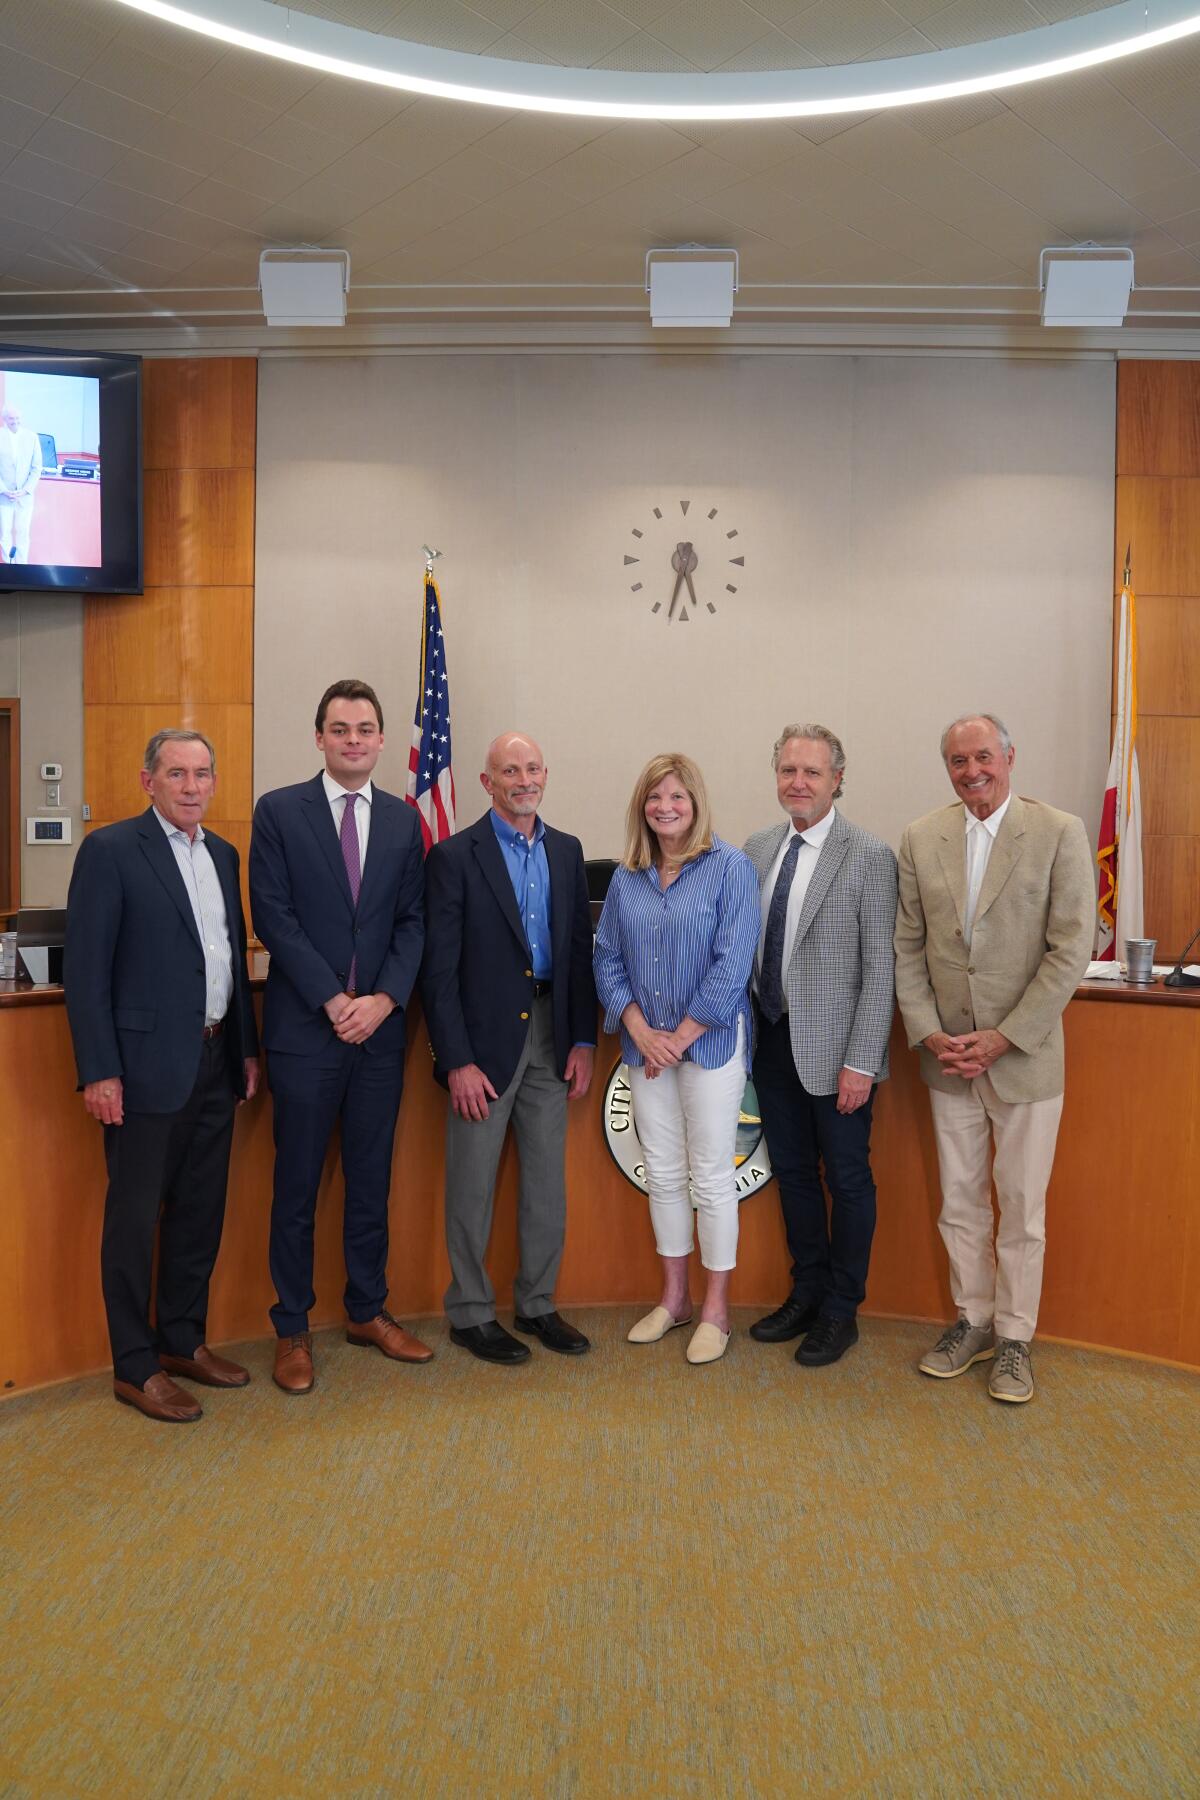 The Laguna Beach City Council poses with incoming City Manager Dave Kiff, third from left.